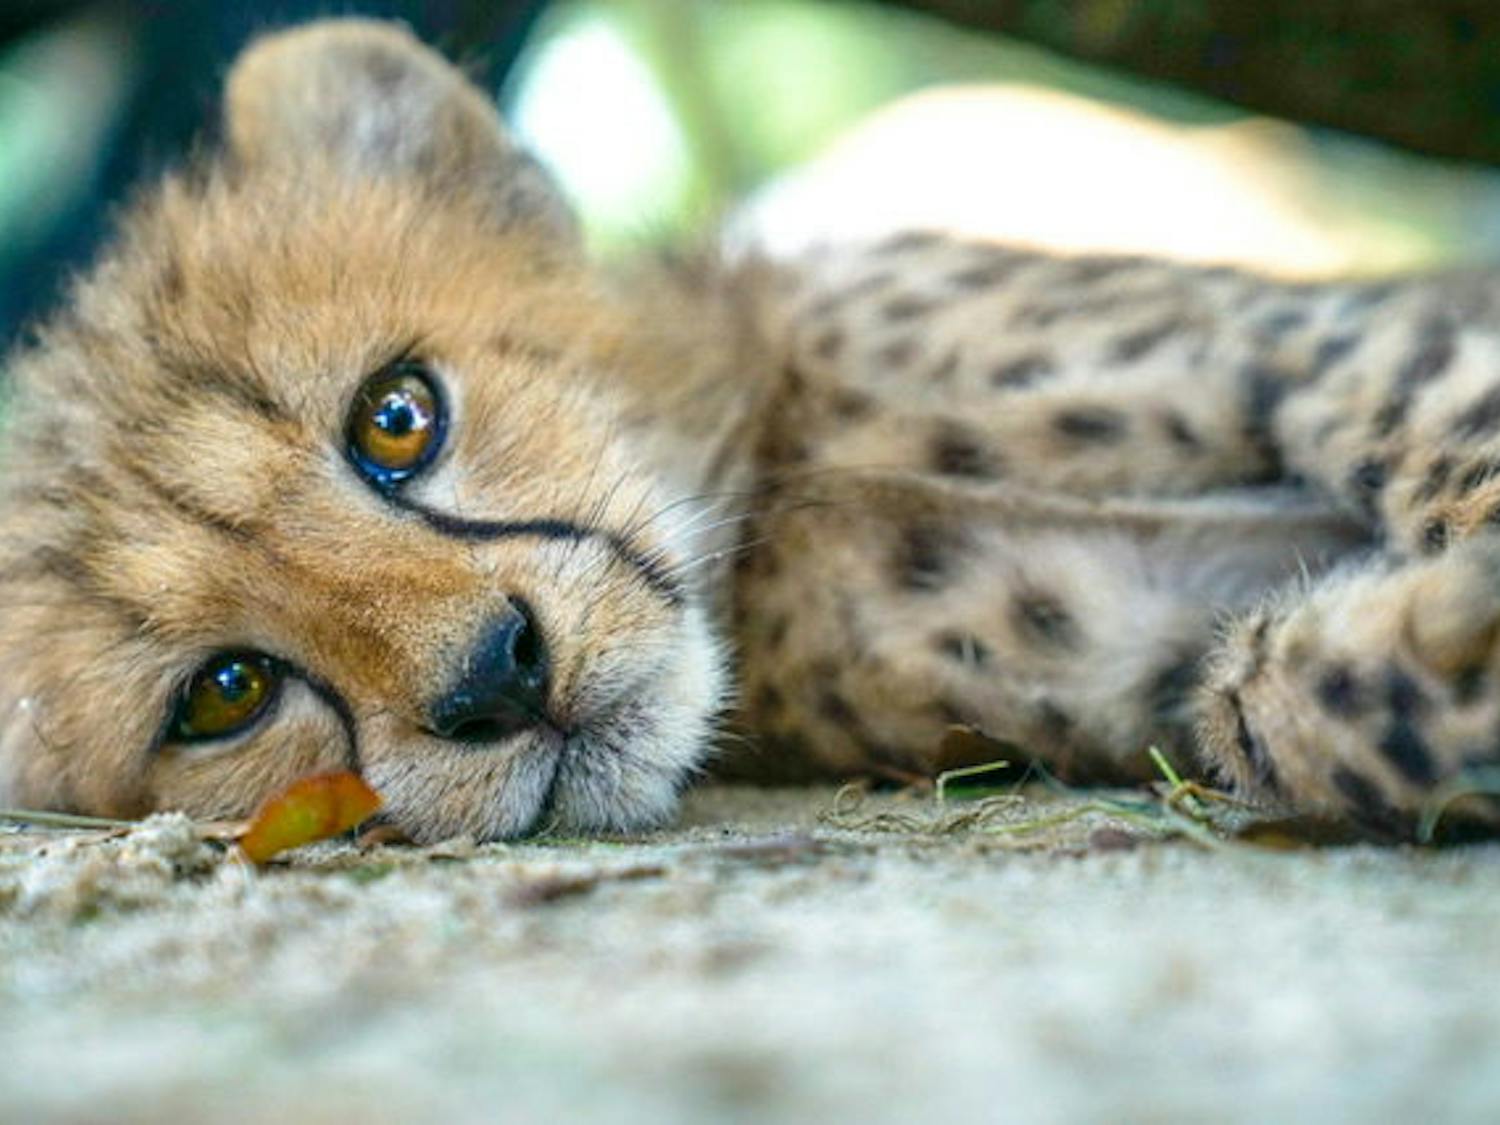 One of three cheetah cubs from Carson Springs Wildlife Conservation Foundation rests after a long day of playing with toys. The trio of cheetah cubs born on June 6 includes two males and a female named Tuesday, Austin and Havy. They are the first documented cheetah cubs born in Gainesville.